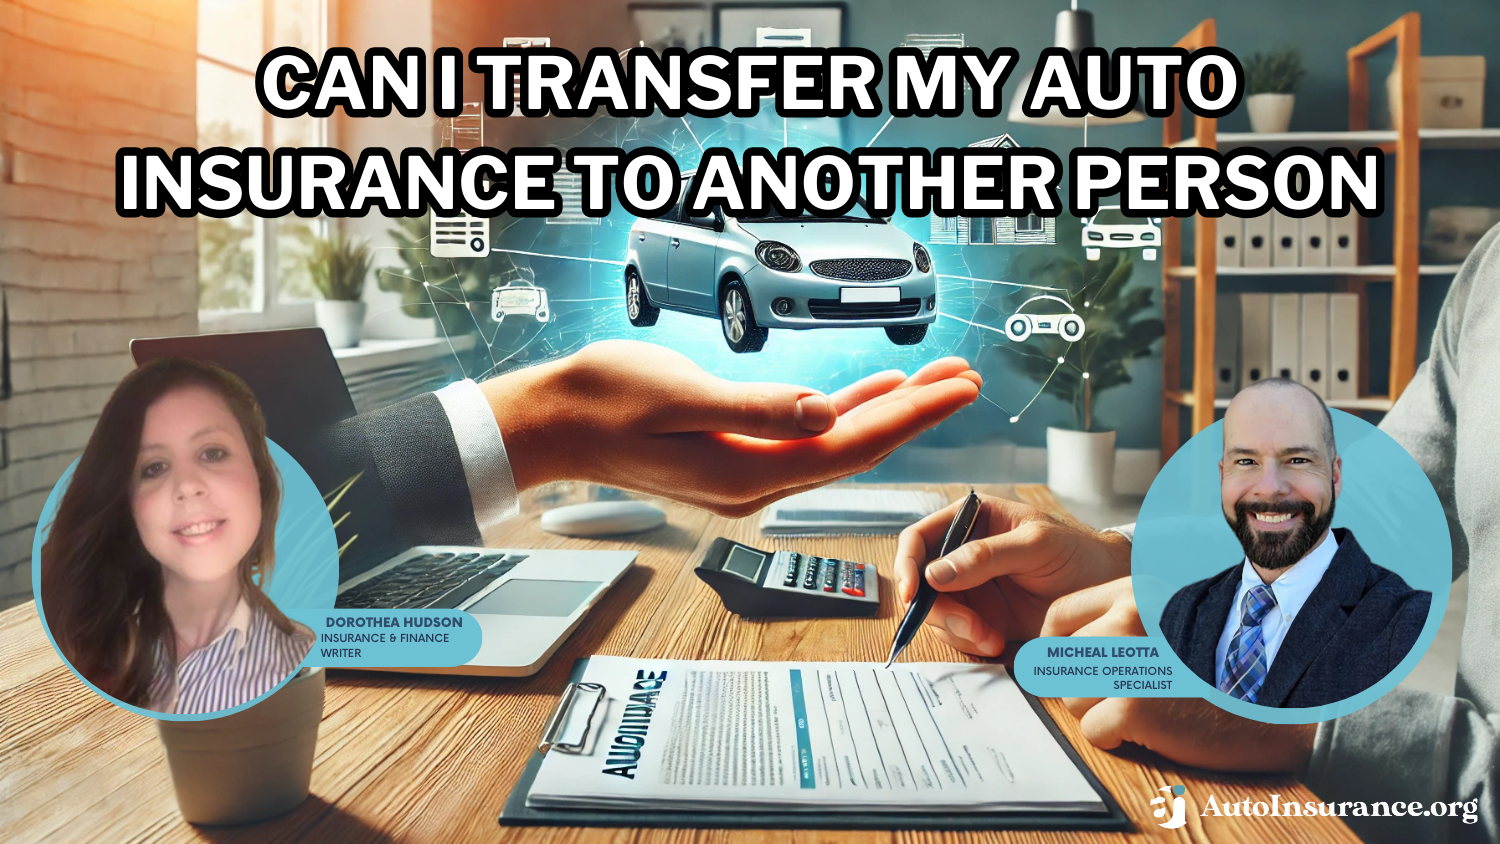 Can I transfer my auto insurance to another person?